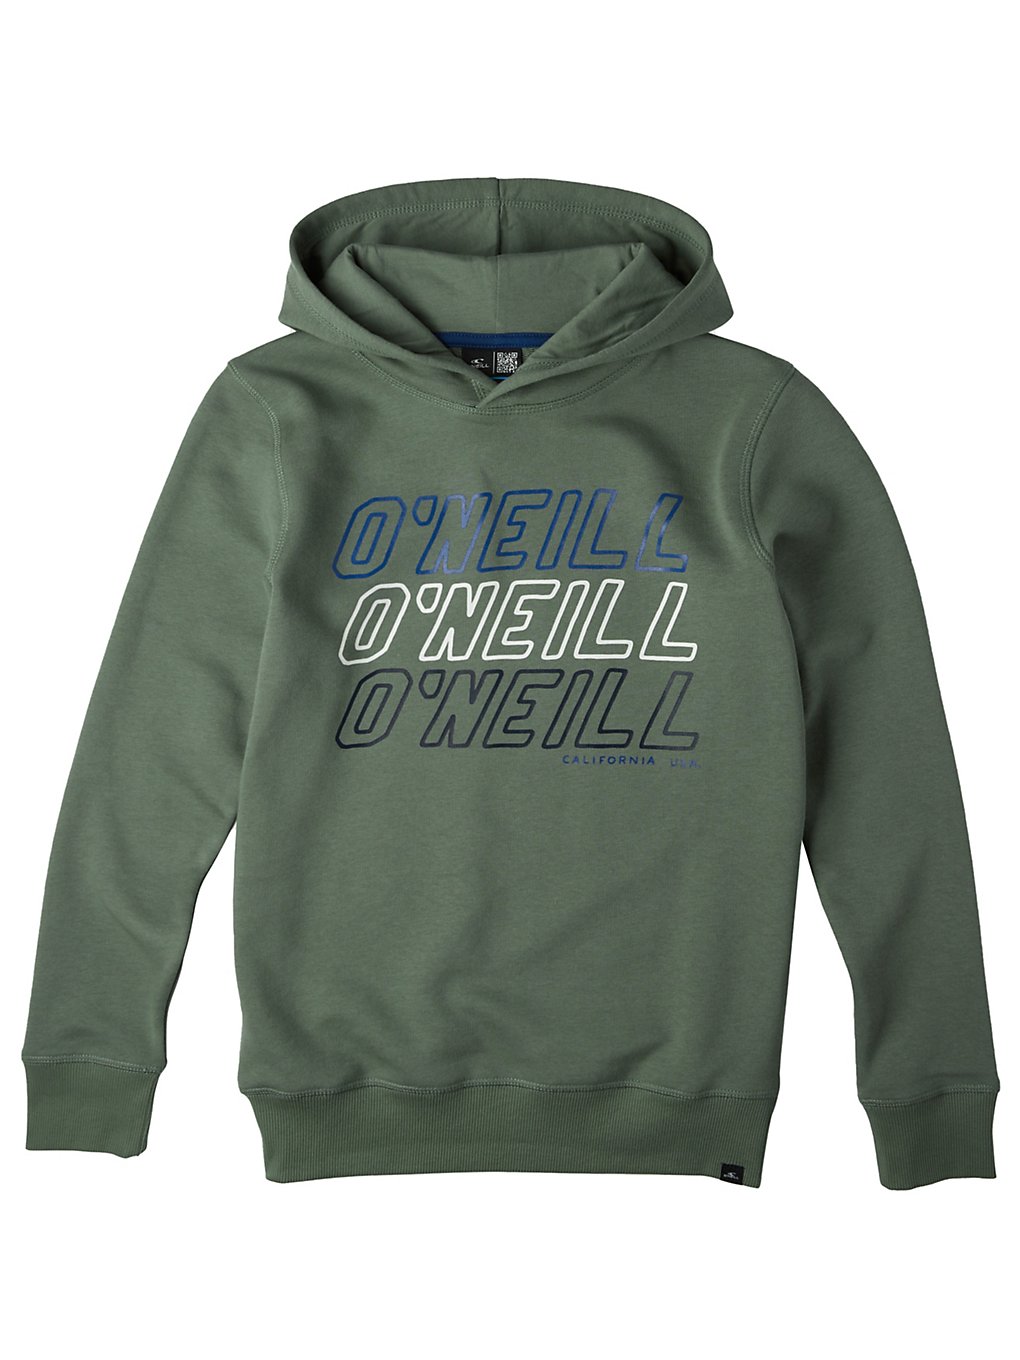 O'Neill All Year Hoodie agave green  - Onlineshop Blue Tomato